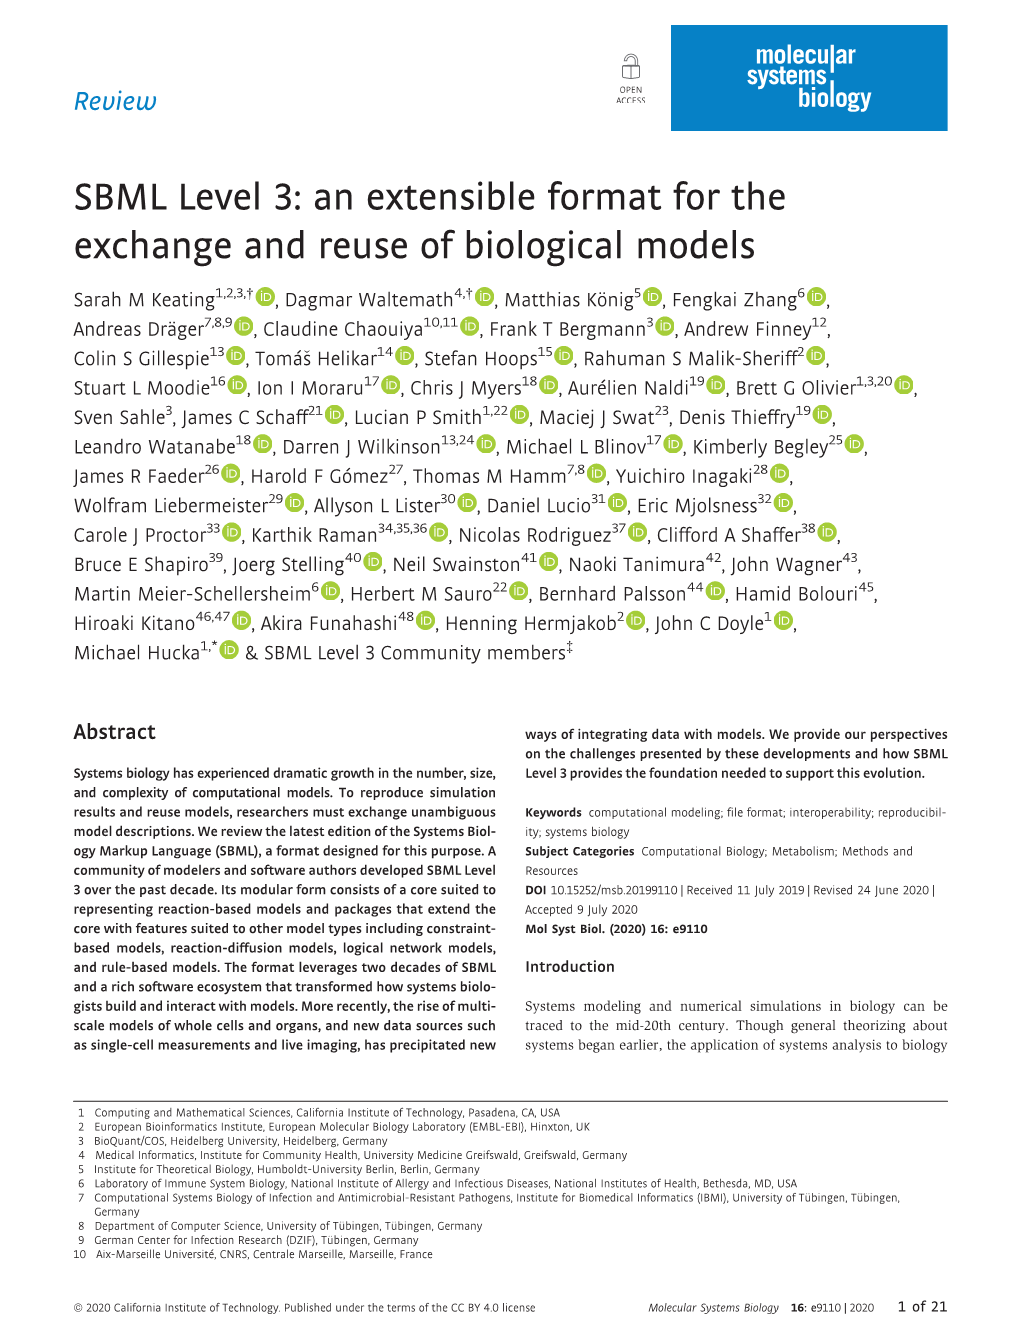 SBML Level 3: an Extensible Format for the Exchange and Reuse of Biological Models